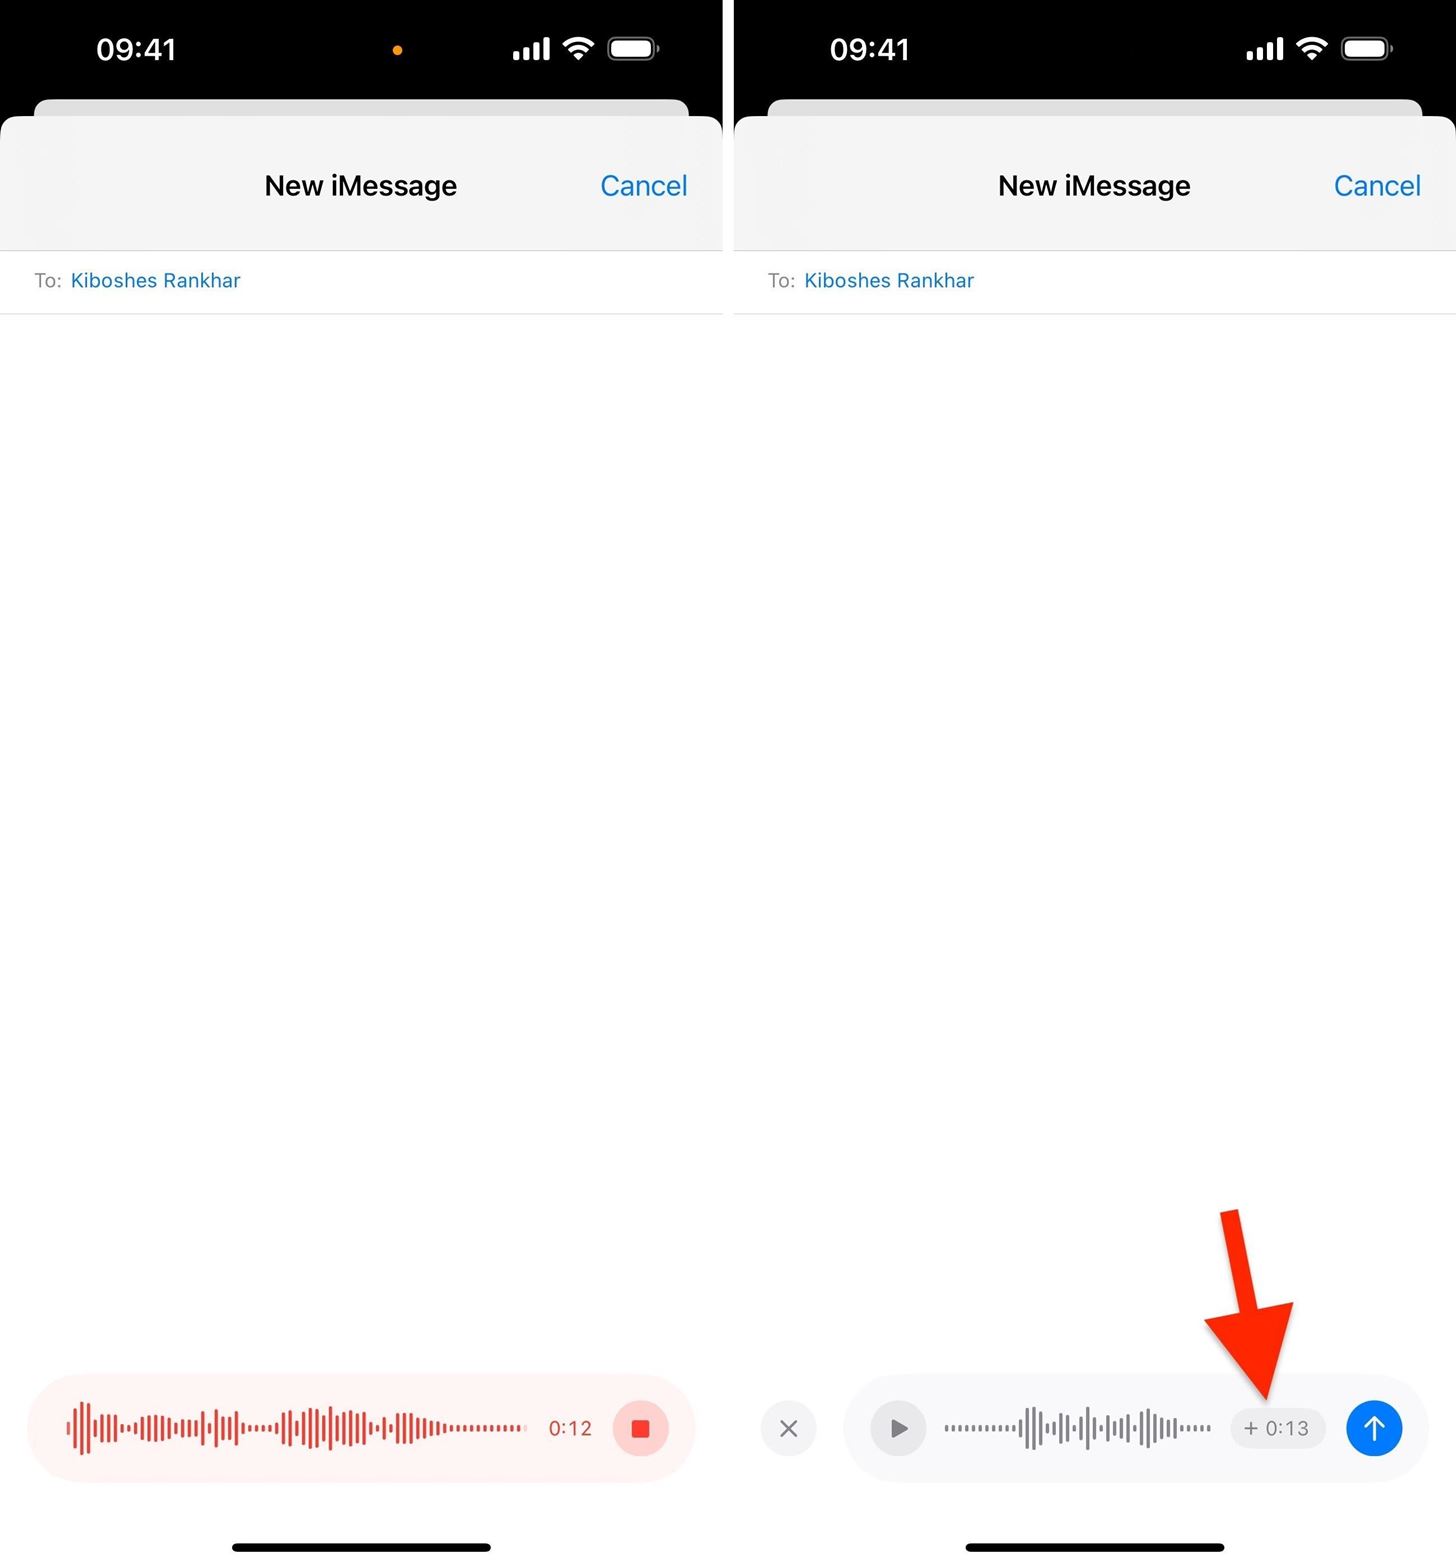 15 Hidden iMessage Features for iPhone You Probably Didn't Know About